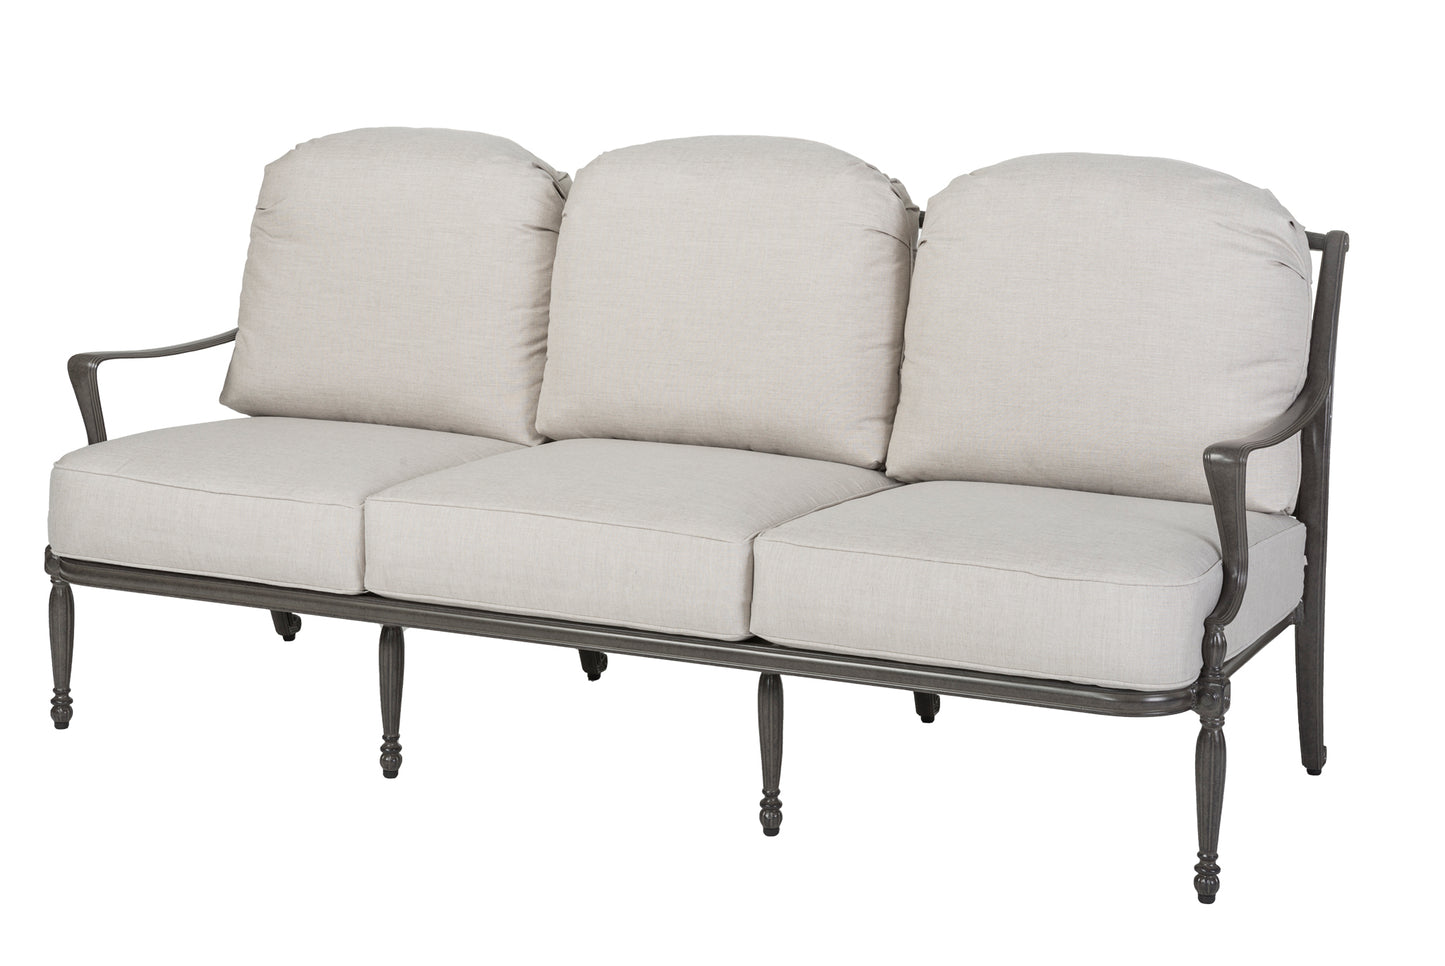 Click to View all Bel Air Seating Options